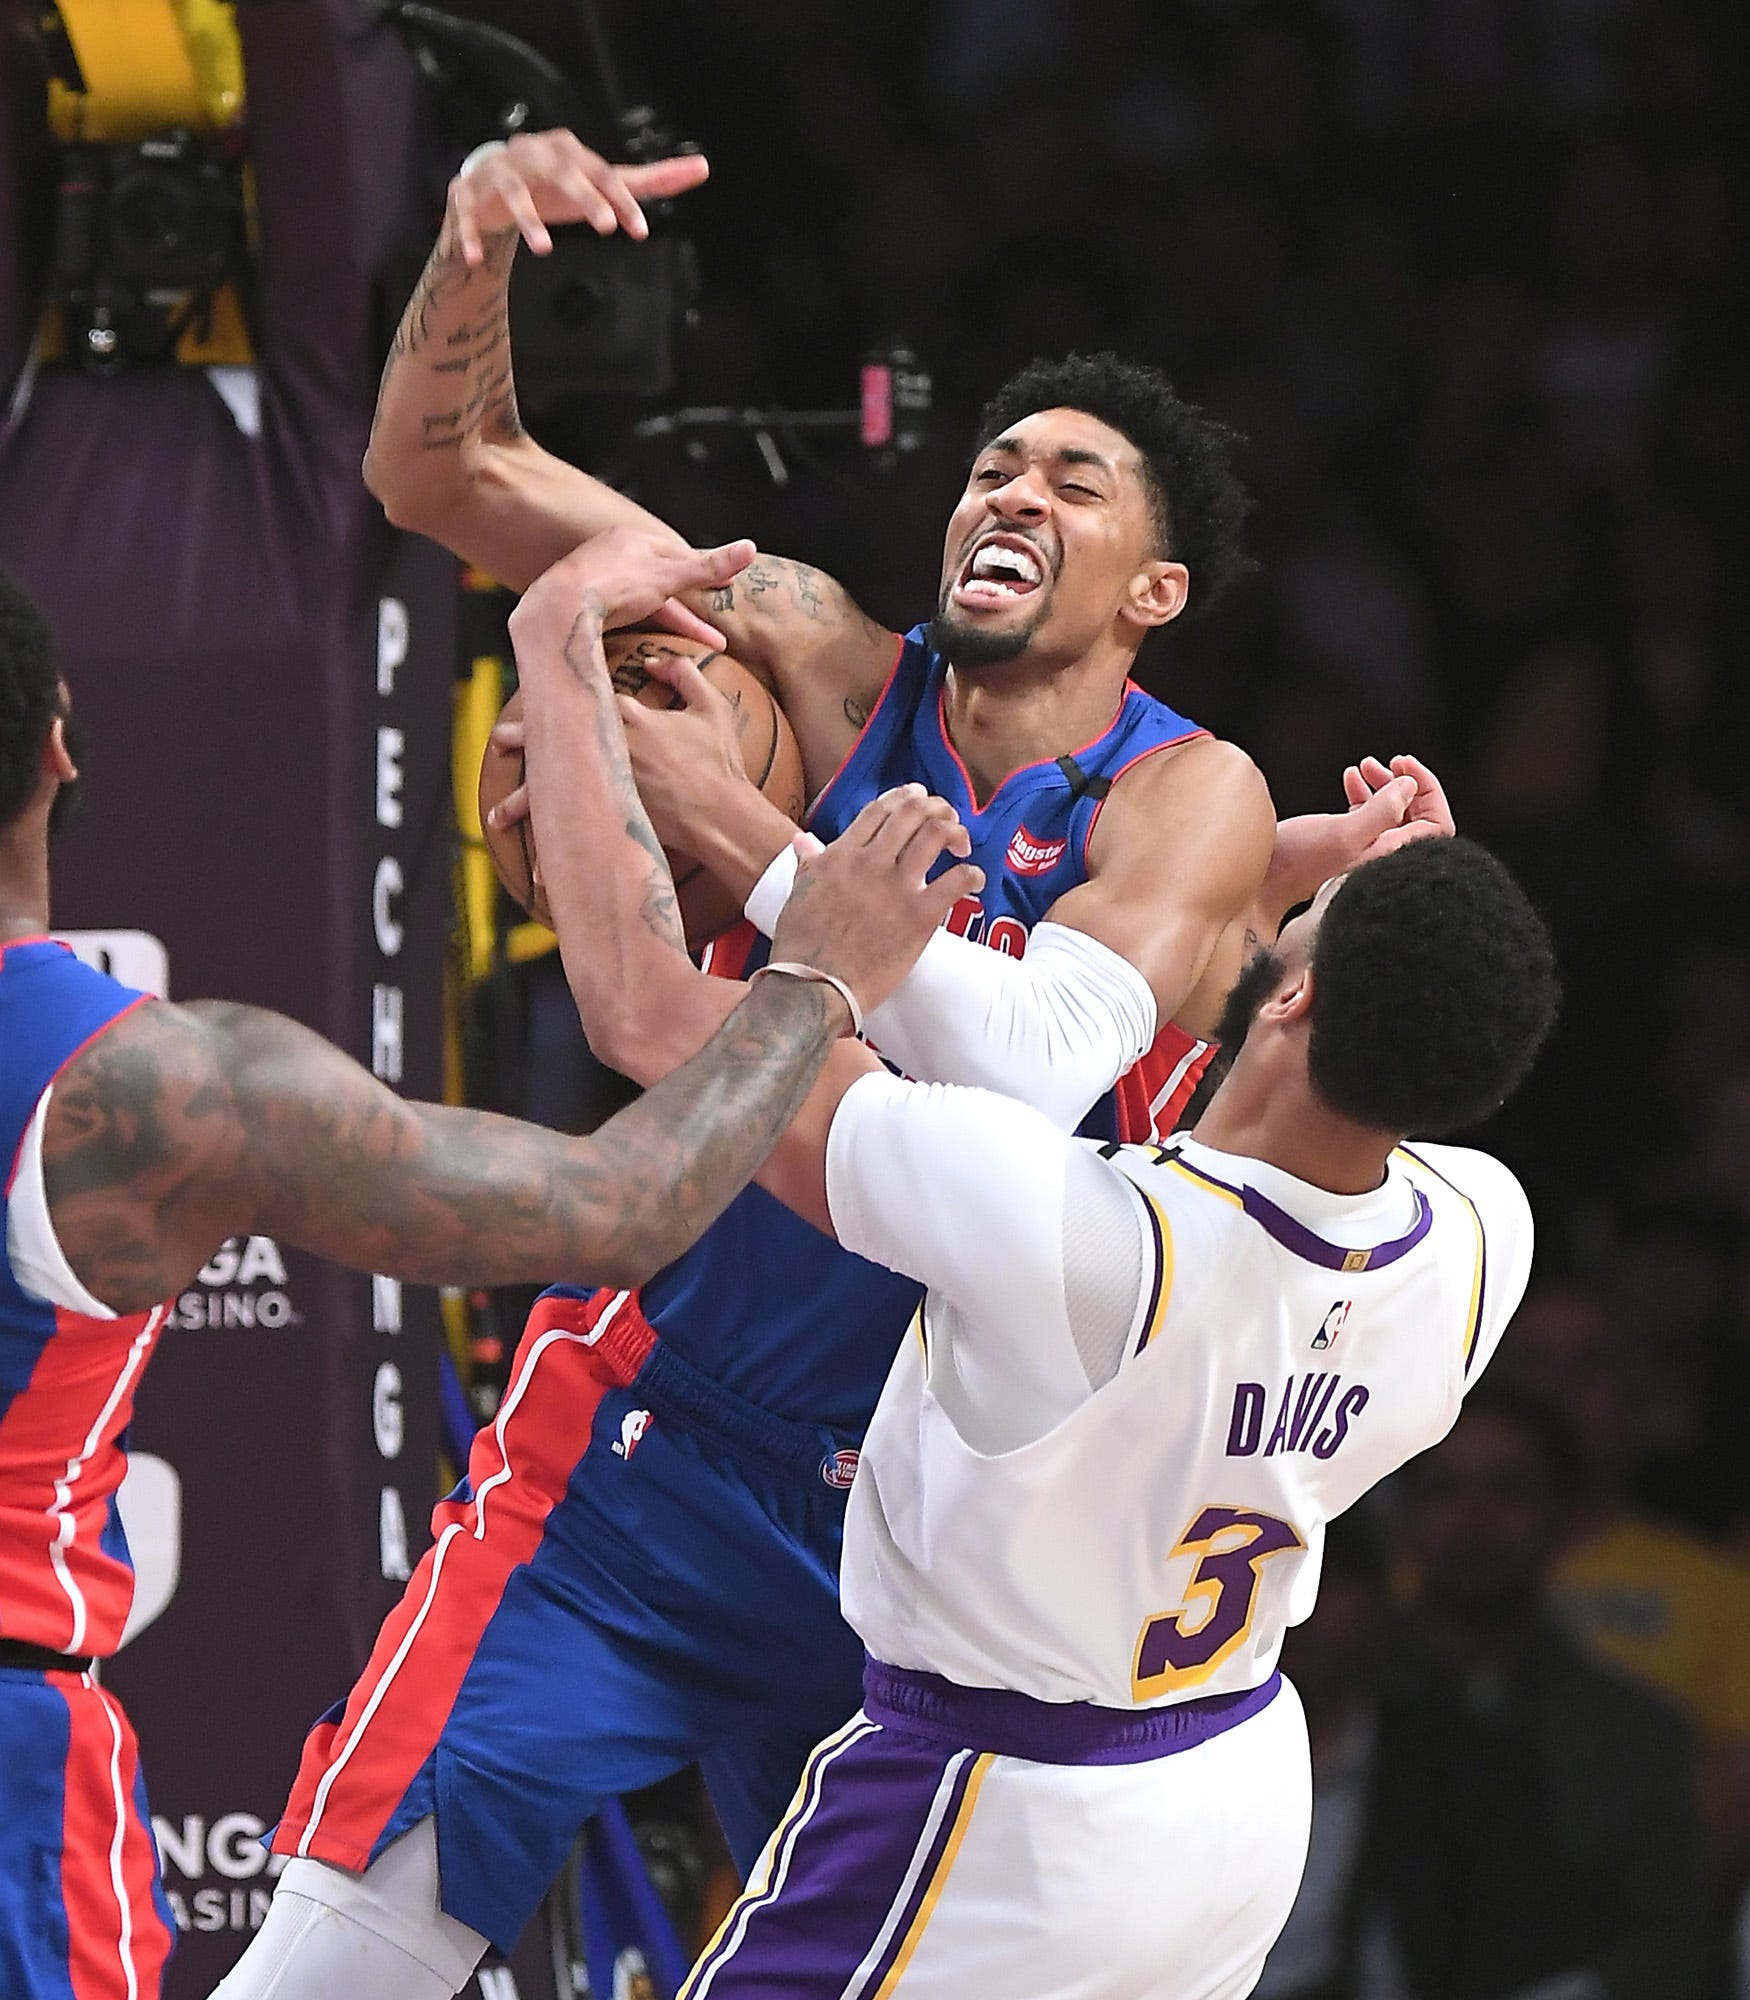 Los Angeles Lakers' Anthony Bradley blocks the shot of Detroit Pistons' Christian Wood in the first quarter.